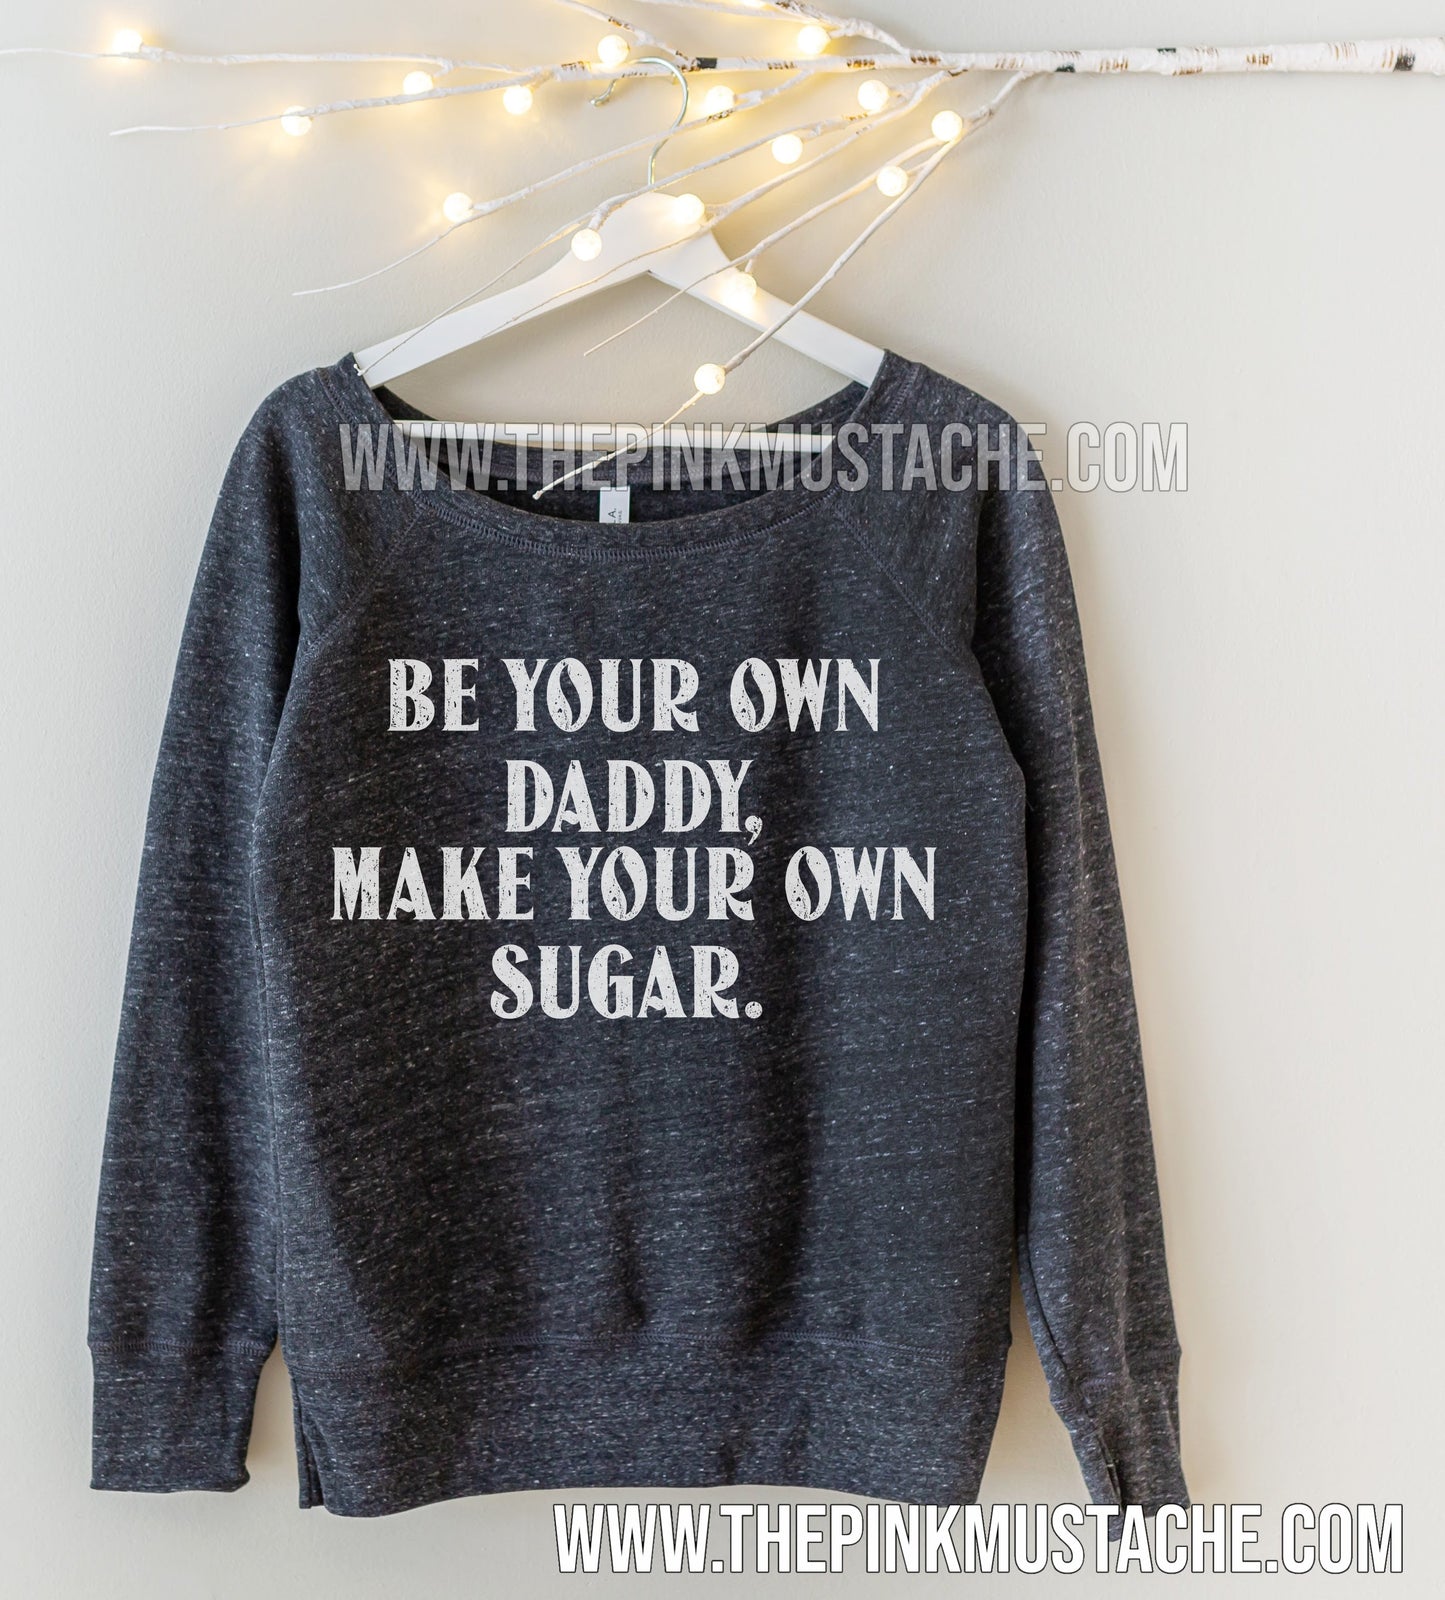 Be Your Own Daddy, Make Your Own Sugar - Off Shoulder Quality Bella Canvas Sweatshirt